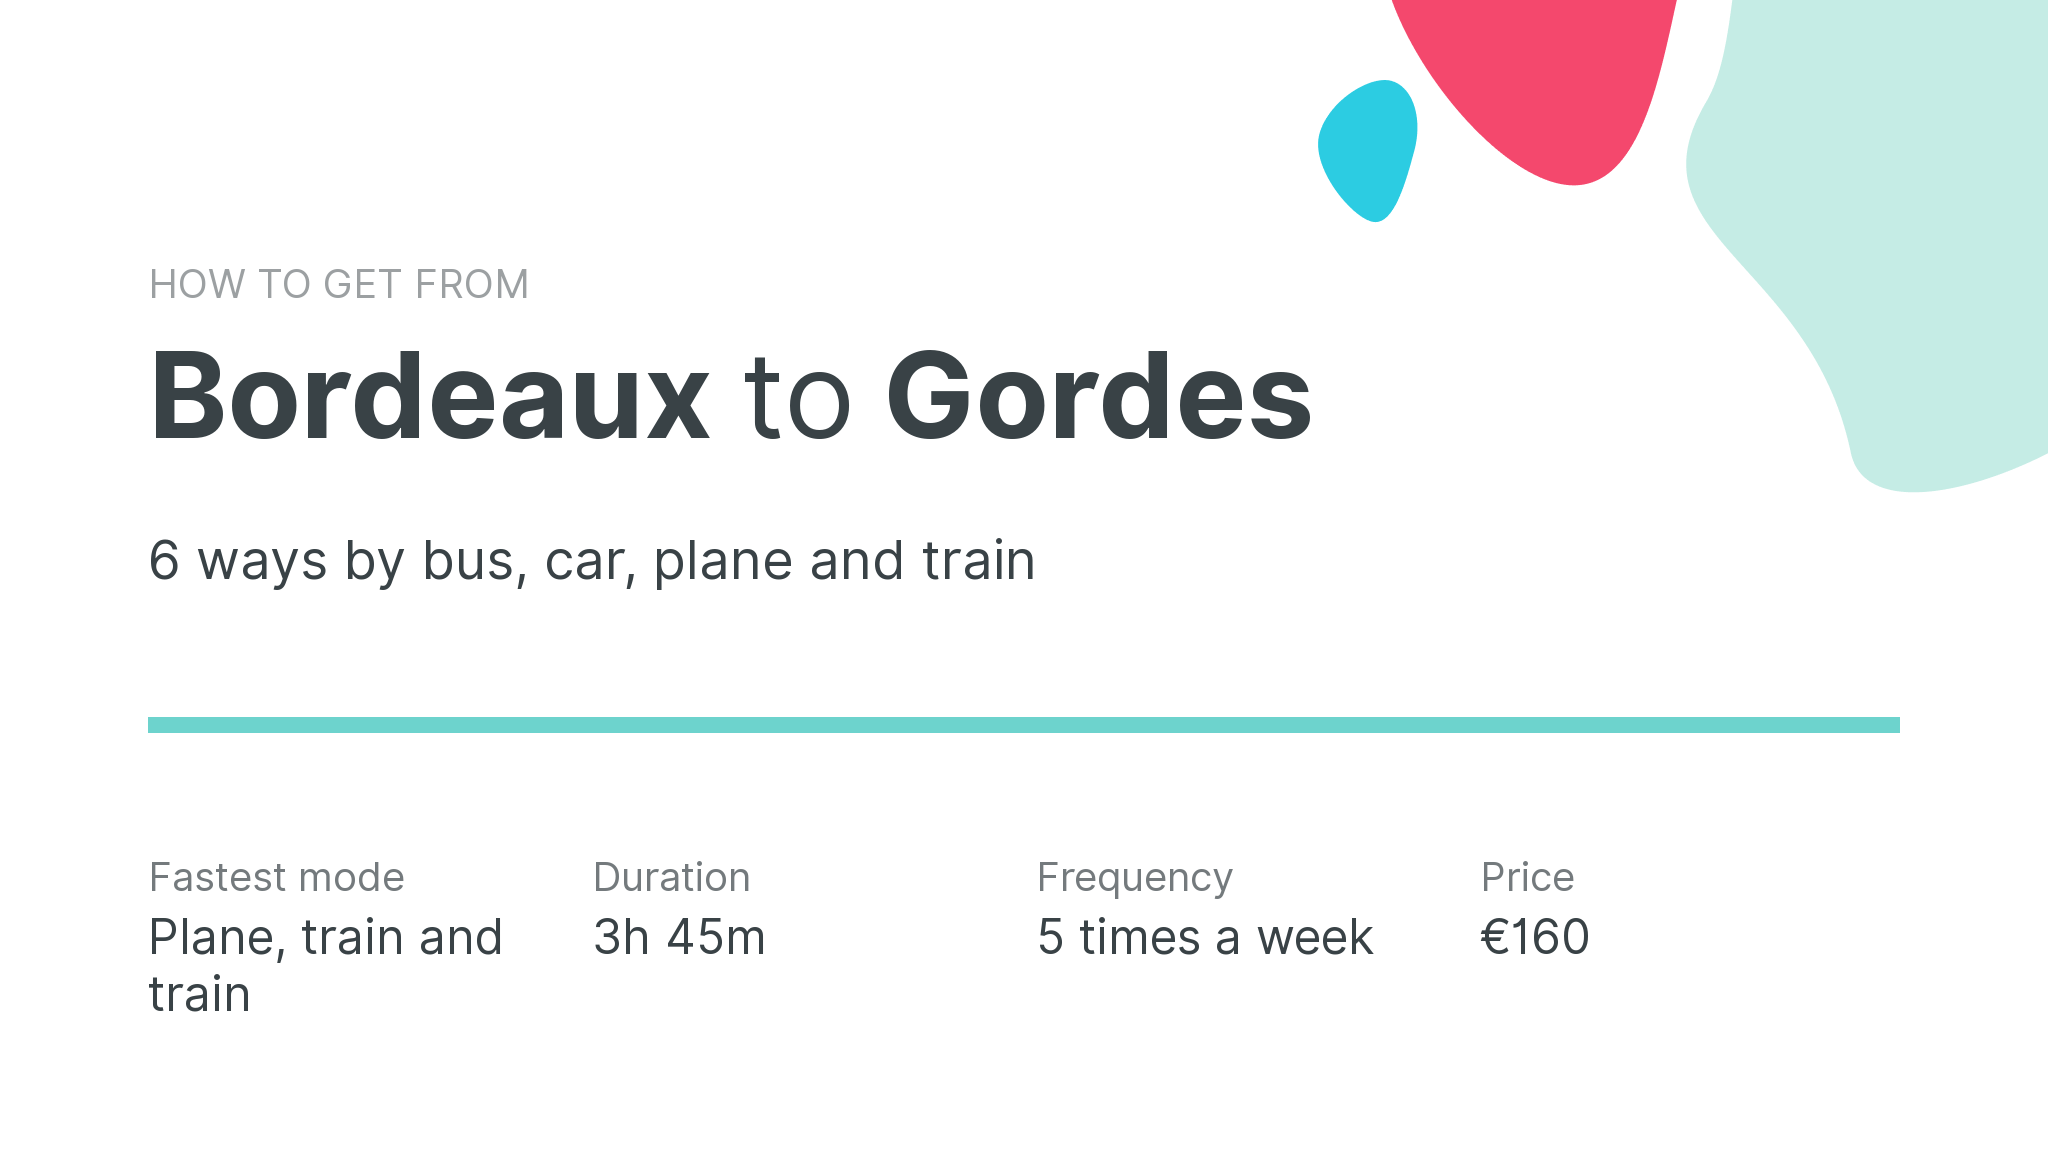 How do I get from Bordeaux to Gordes